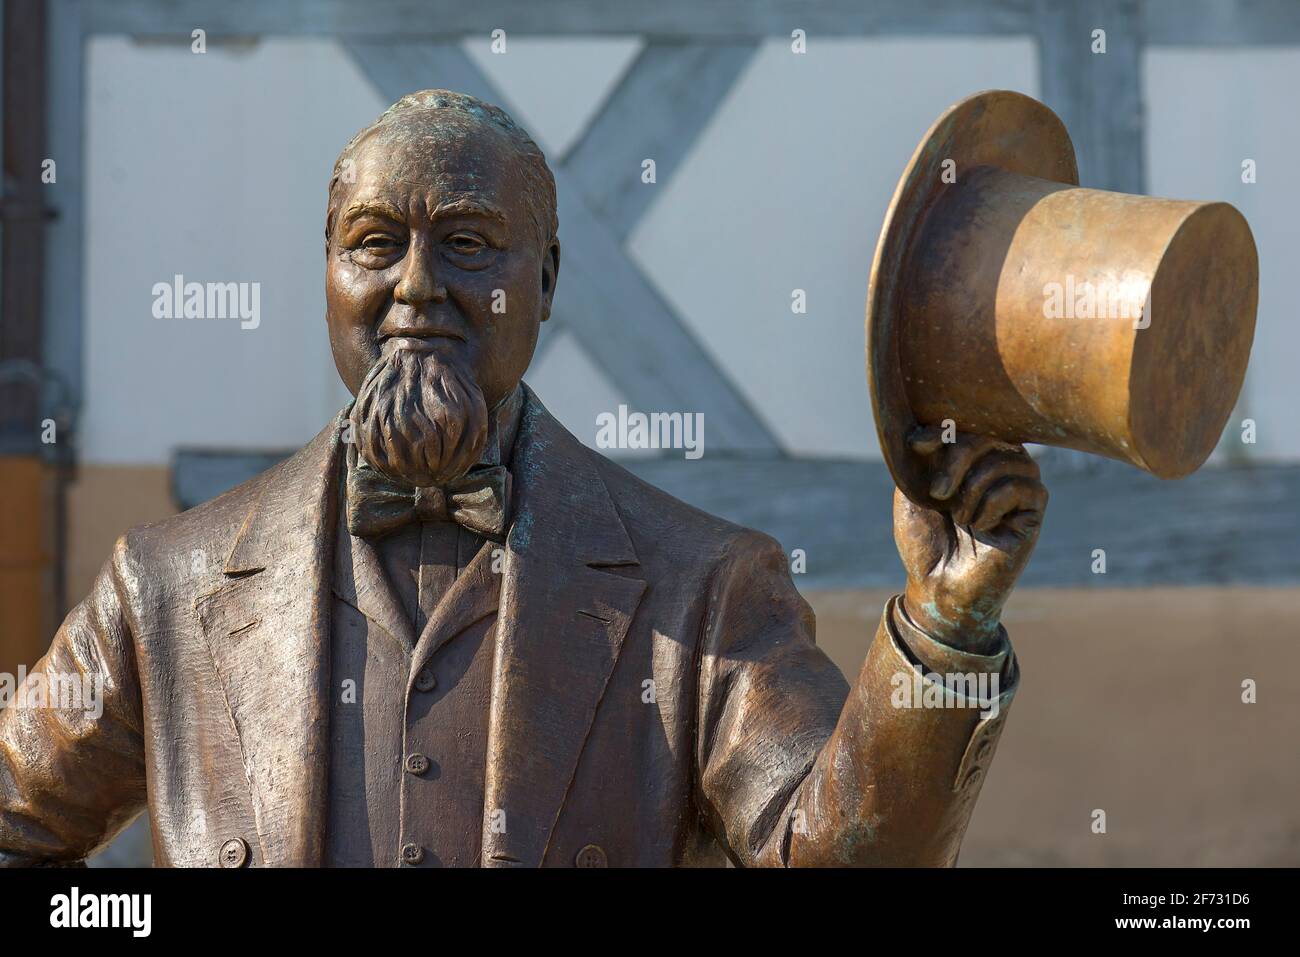 Detail of the bronze sculpture of Levi Strauss in front of his birthplace, today museum, bronze figure created by the artist Rainer Kurka 2020 Stock Photo